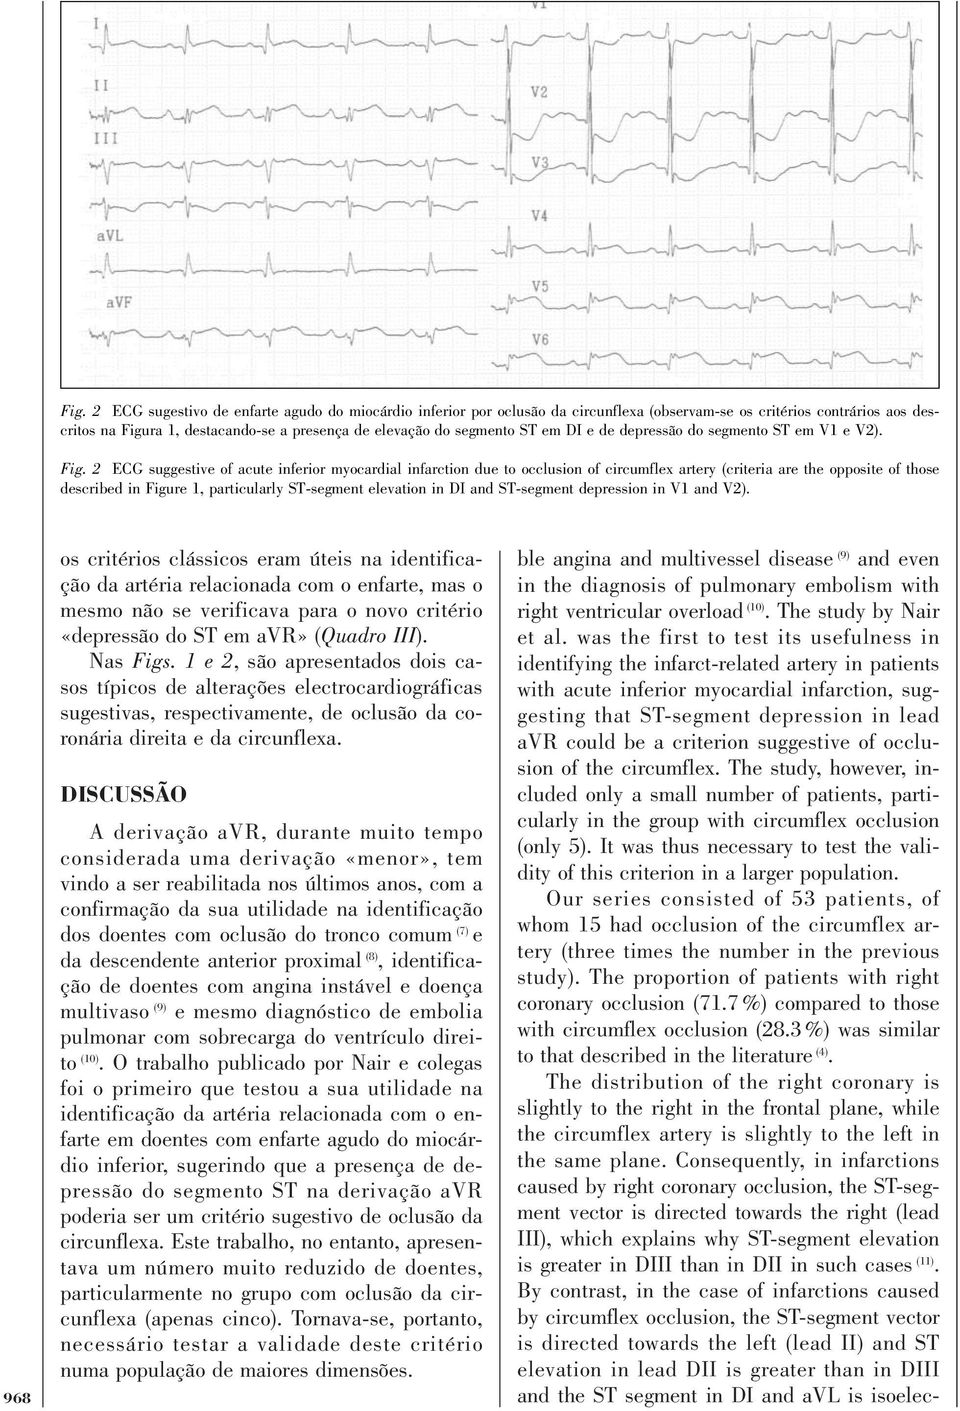 2 ECG suggestive of acute inferior myocardial infarction due to occlusion of circumflex artery (criteria are the opposite of those described in Figure 1, particularly ST-segment elevation in DI and